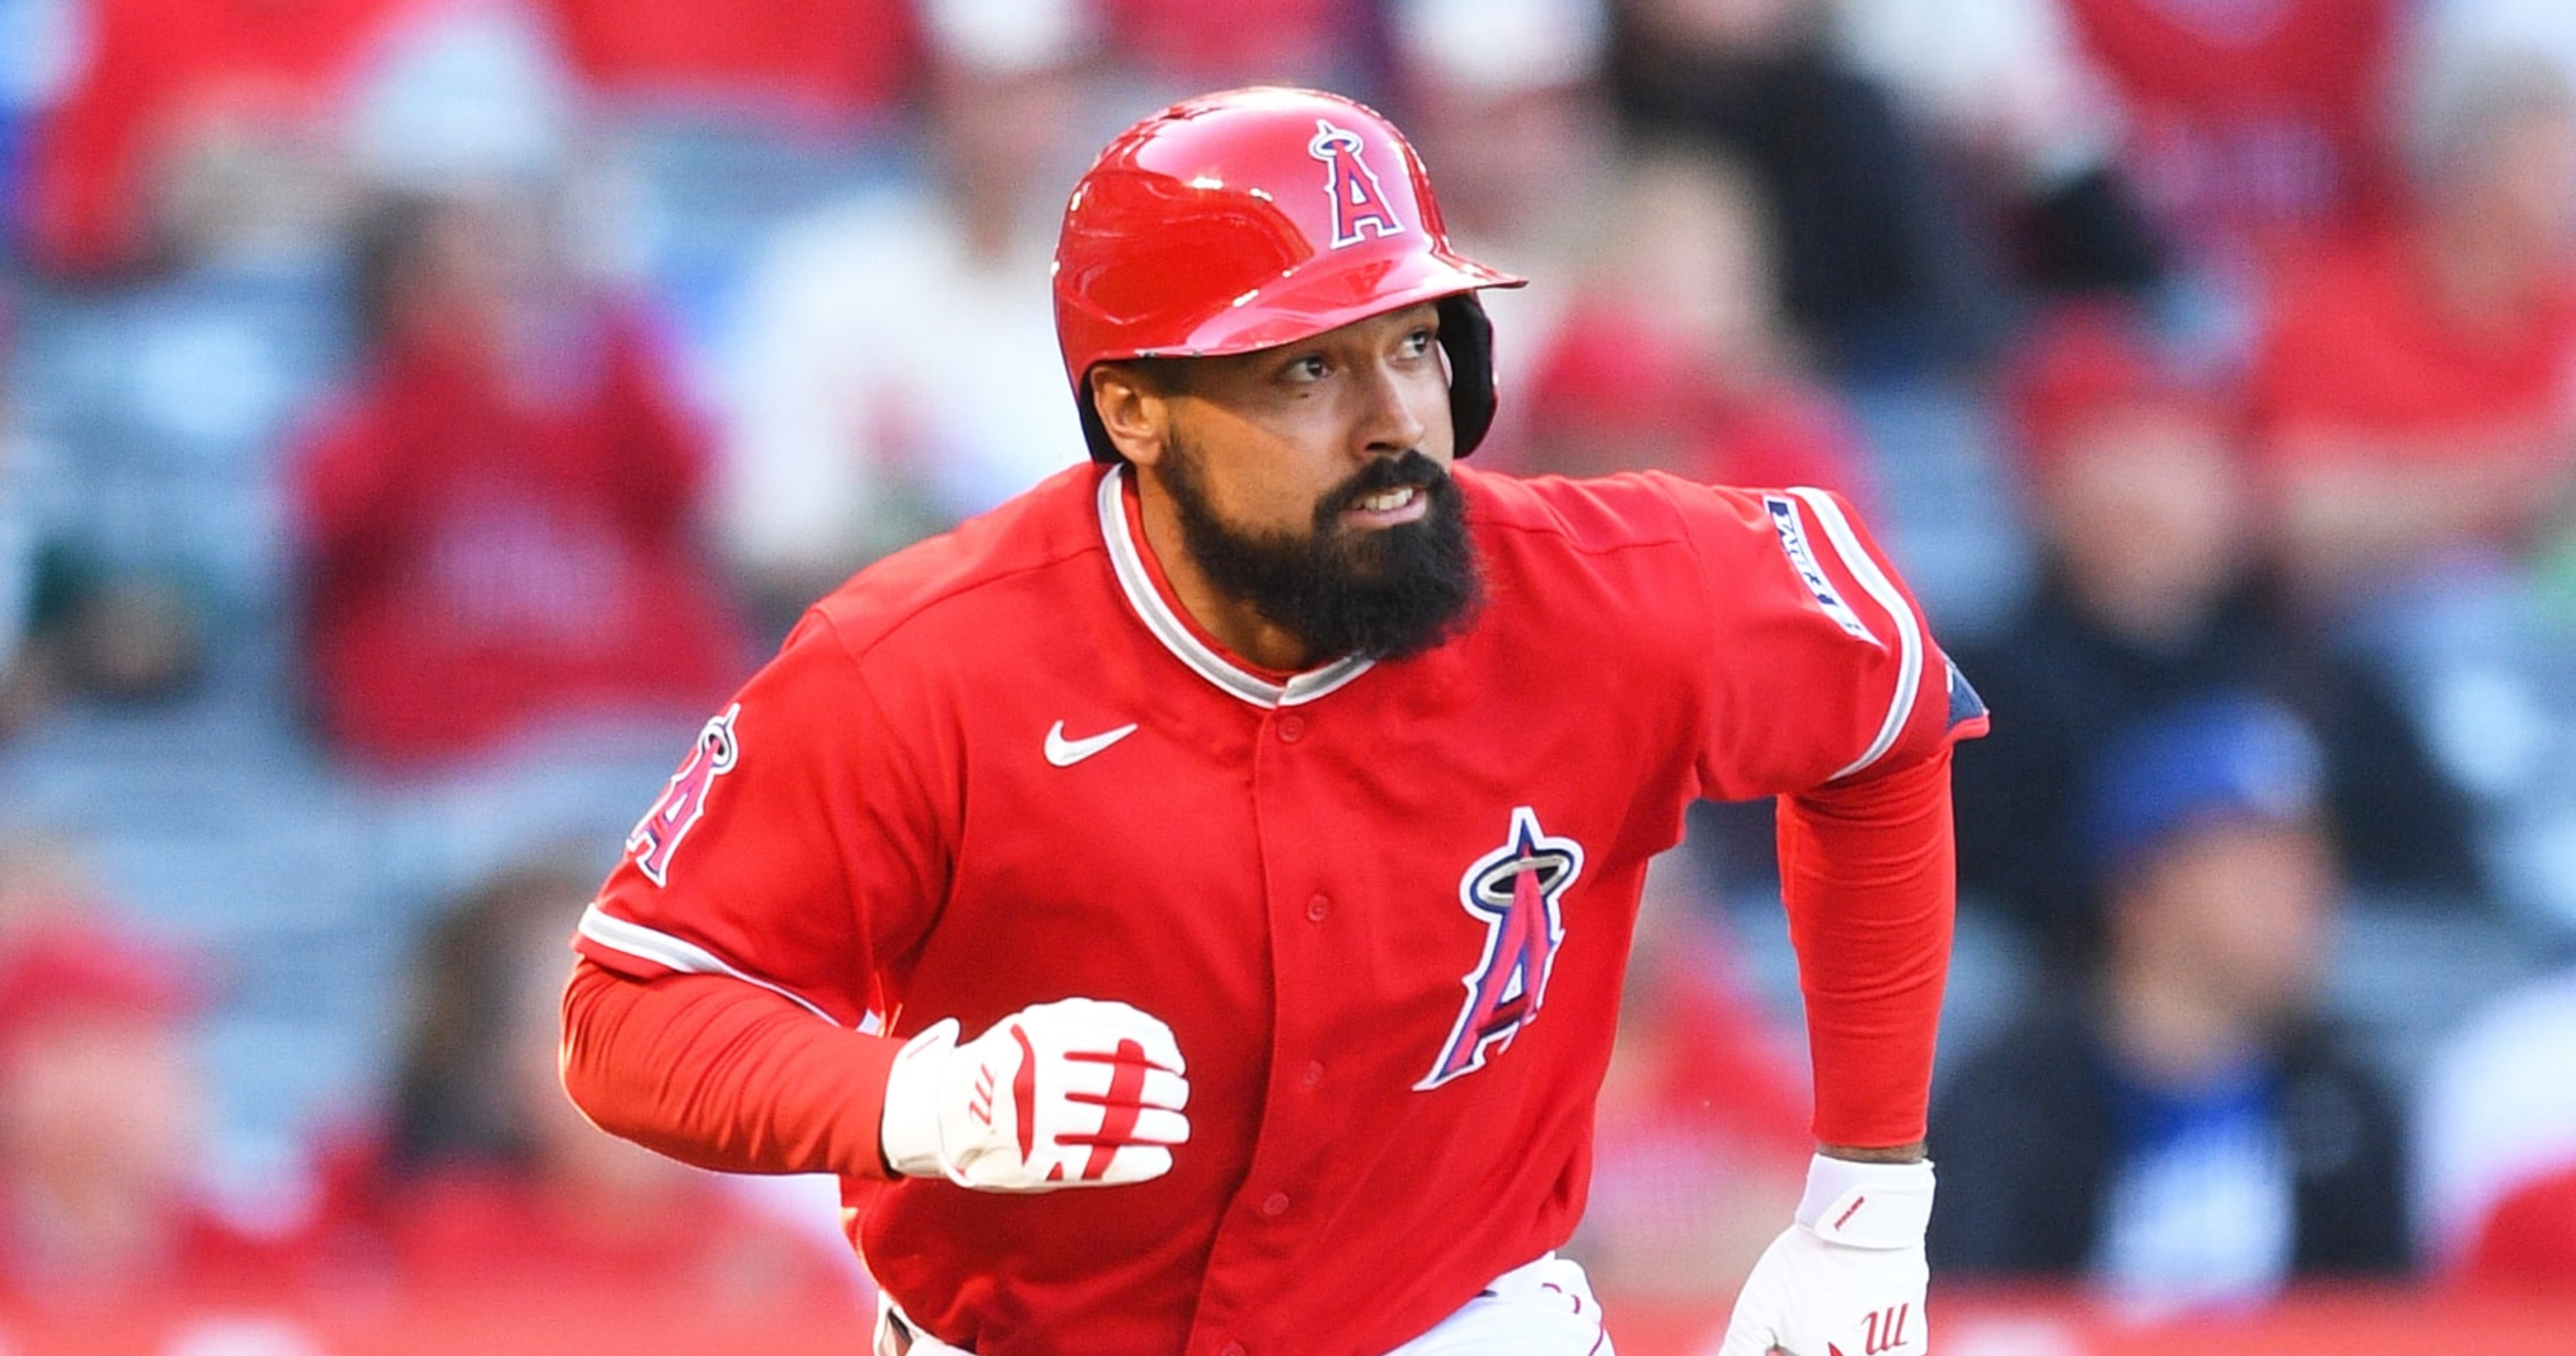 Angels' Anthony Rendon 'Can't Comment' As MLB Investigates